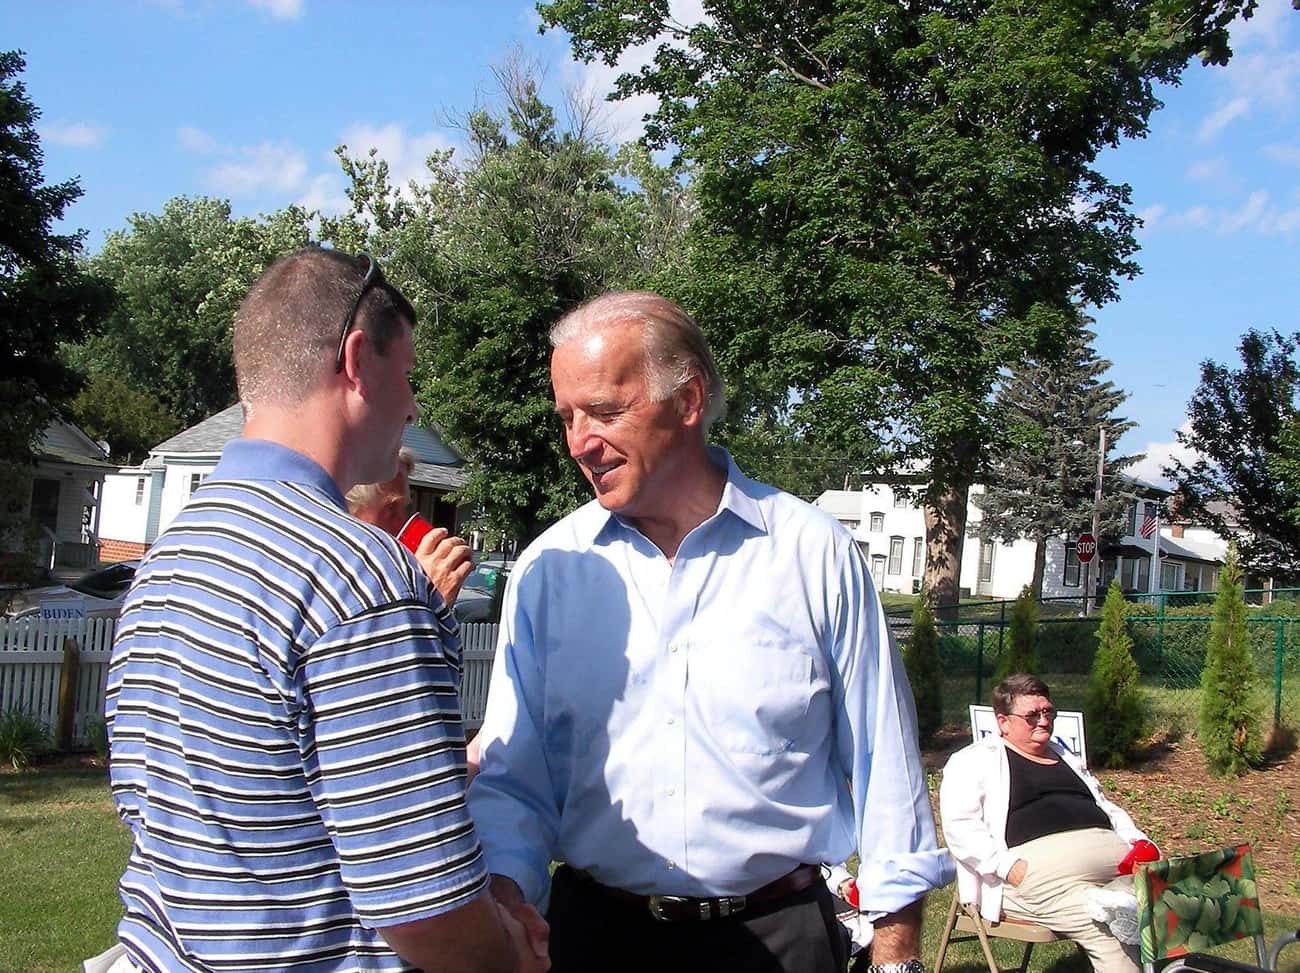 January 31, 2007: Biden Entered The Presidential Primary And Ran Against Obama